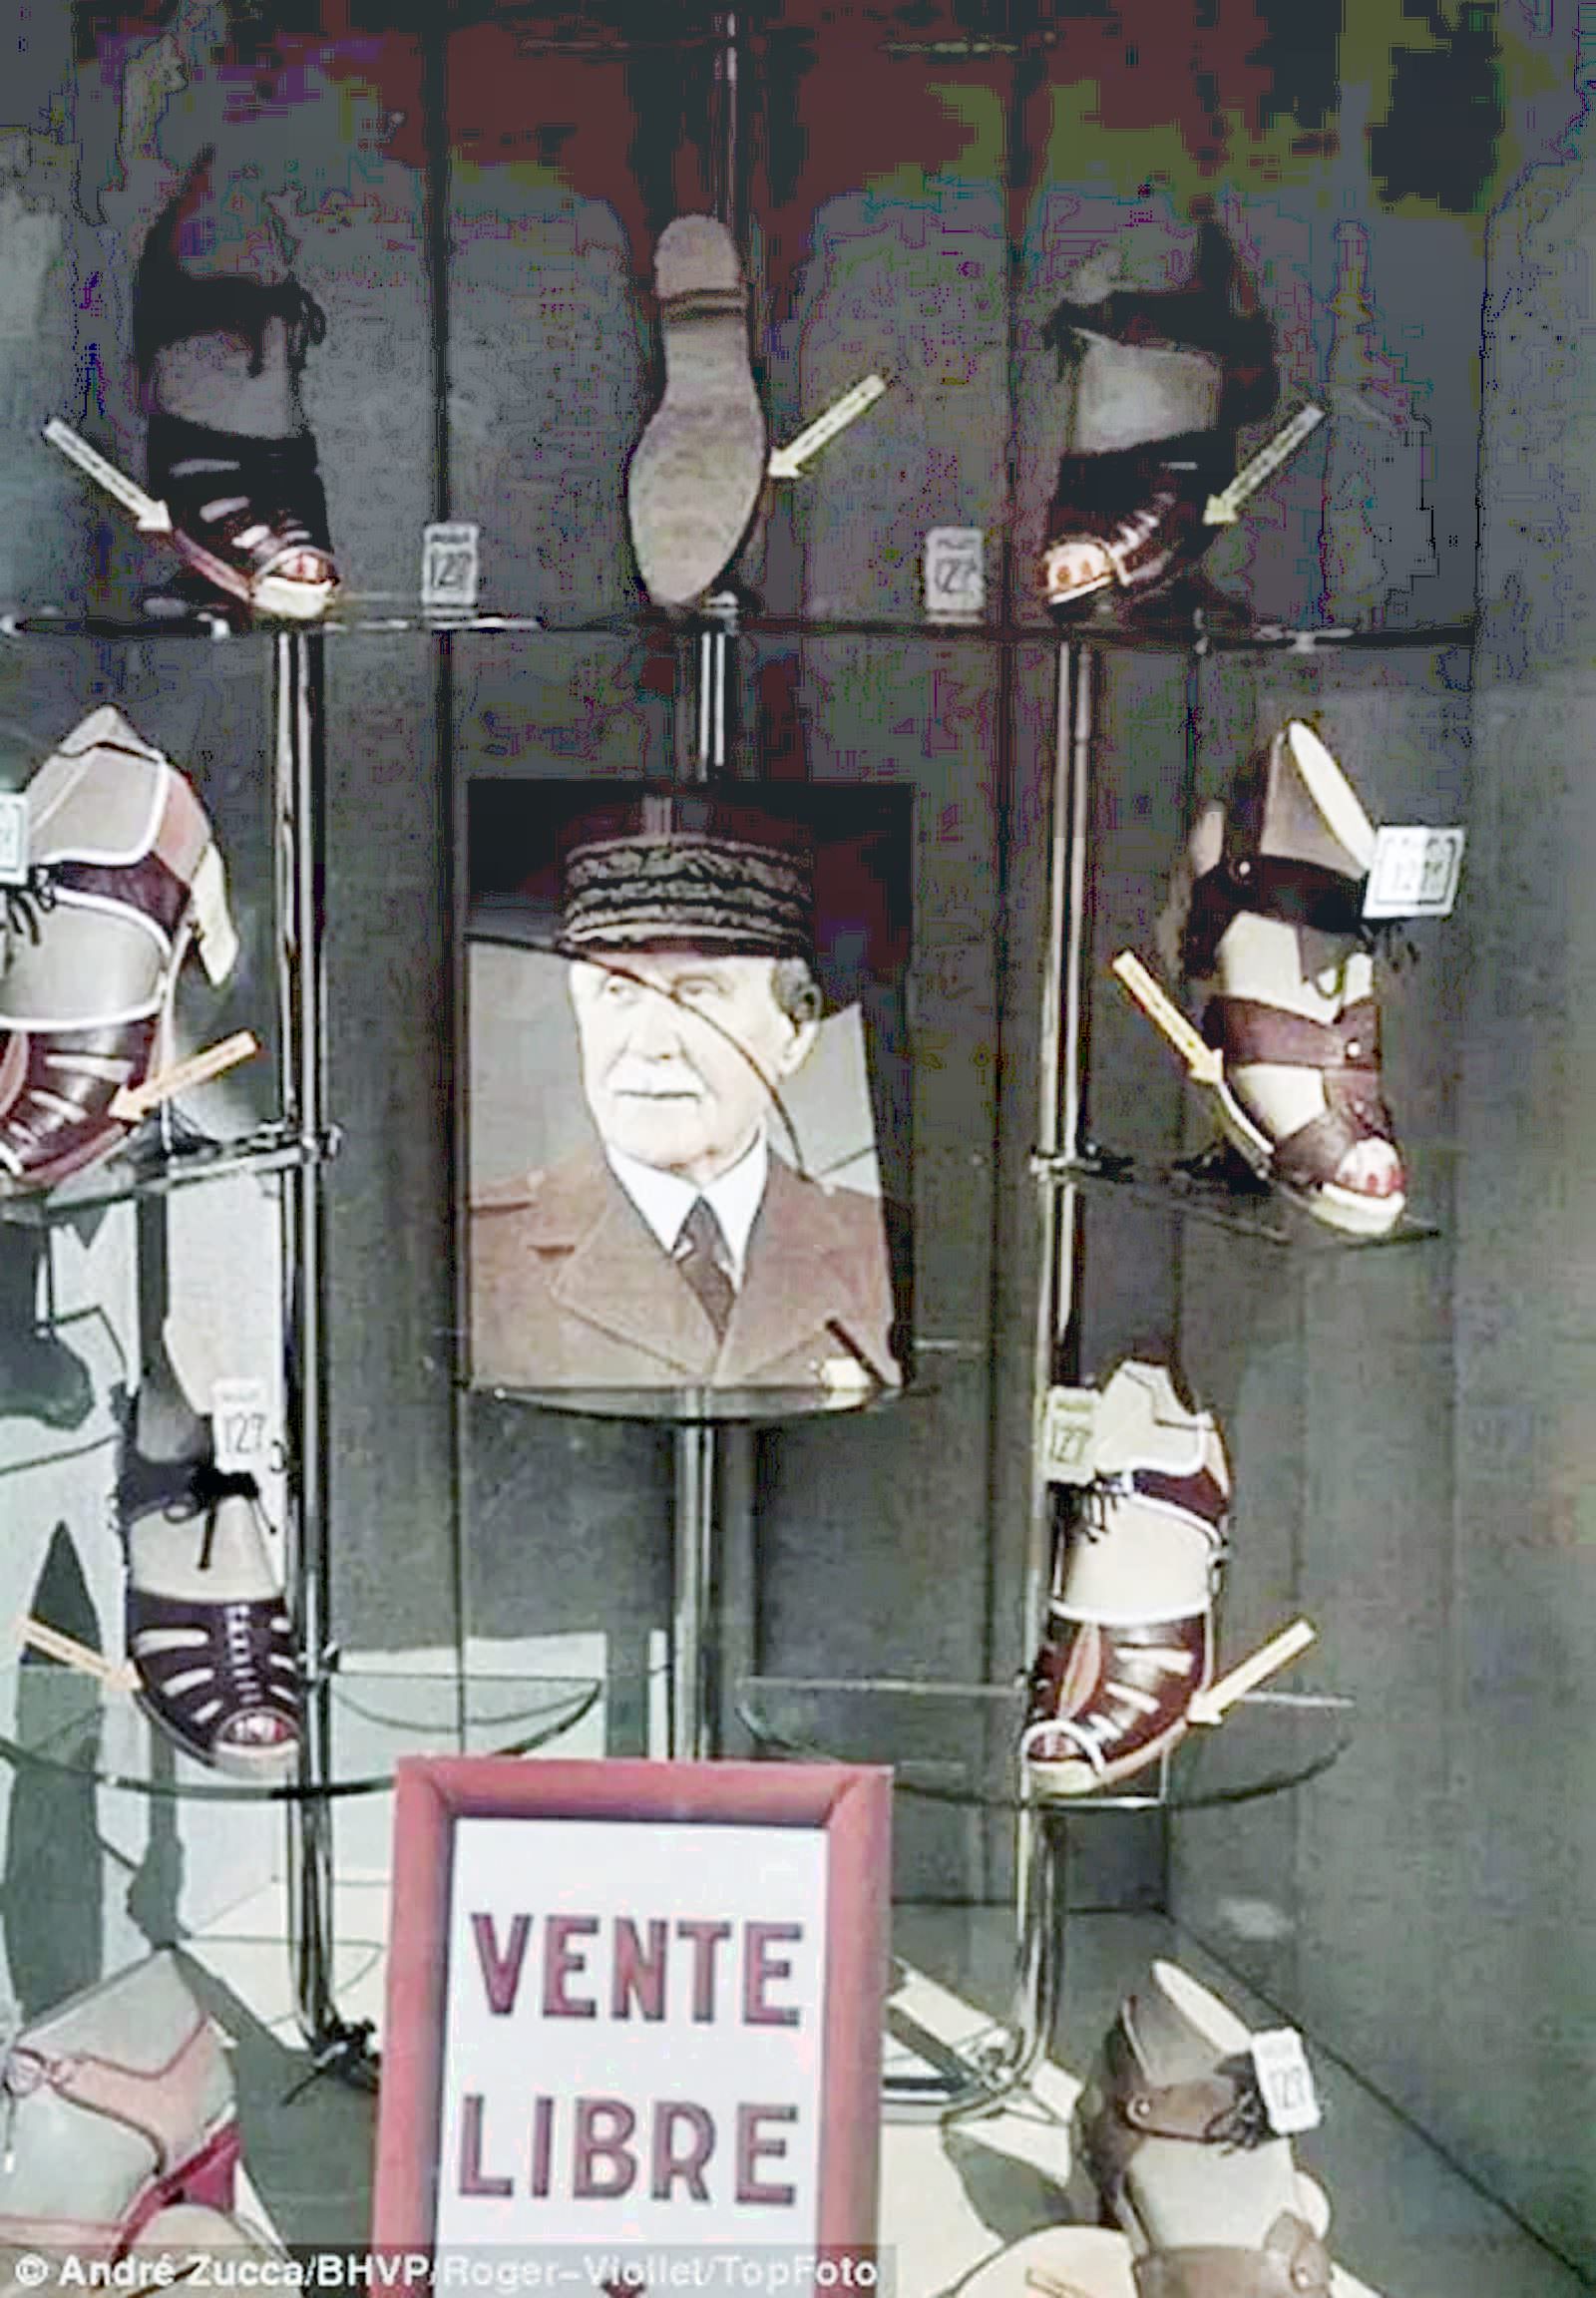 Marshal Philippe Pétain, a hero of the First World War who became the head of the Vichy government during the Nazi occupation, is the centerpiece in a shoe shop’s window display.